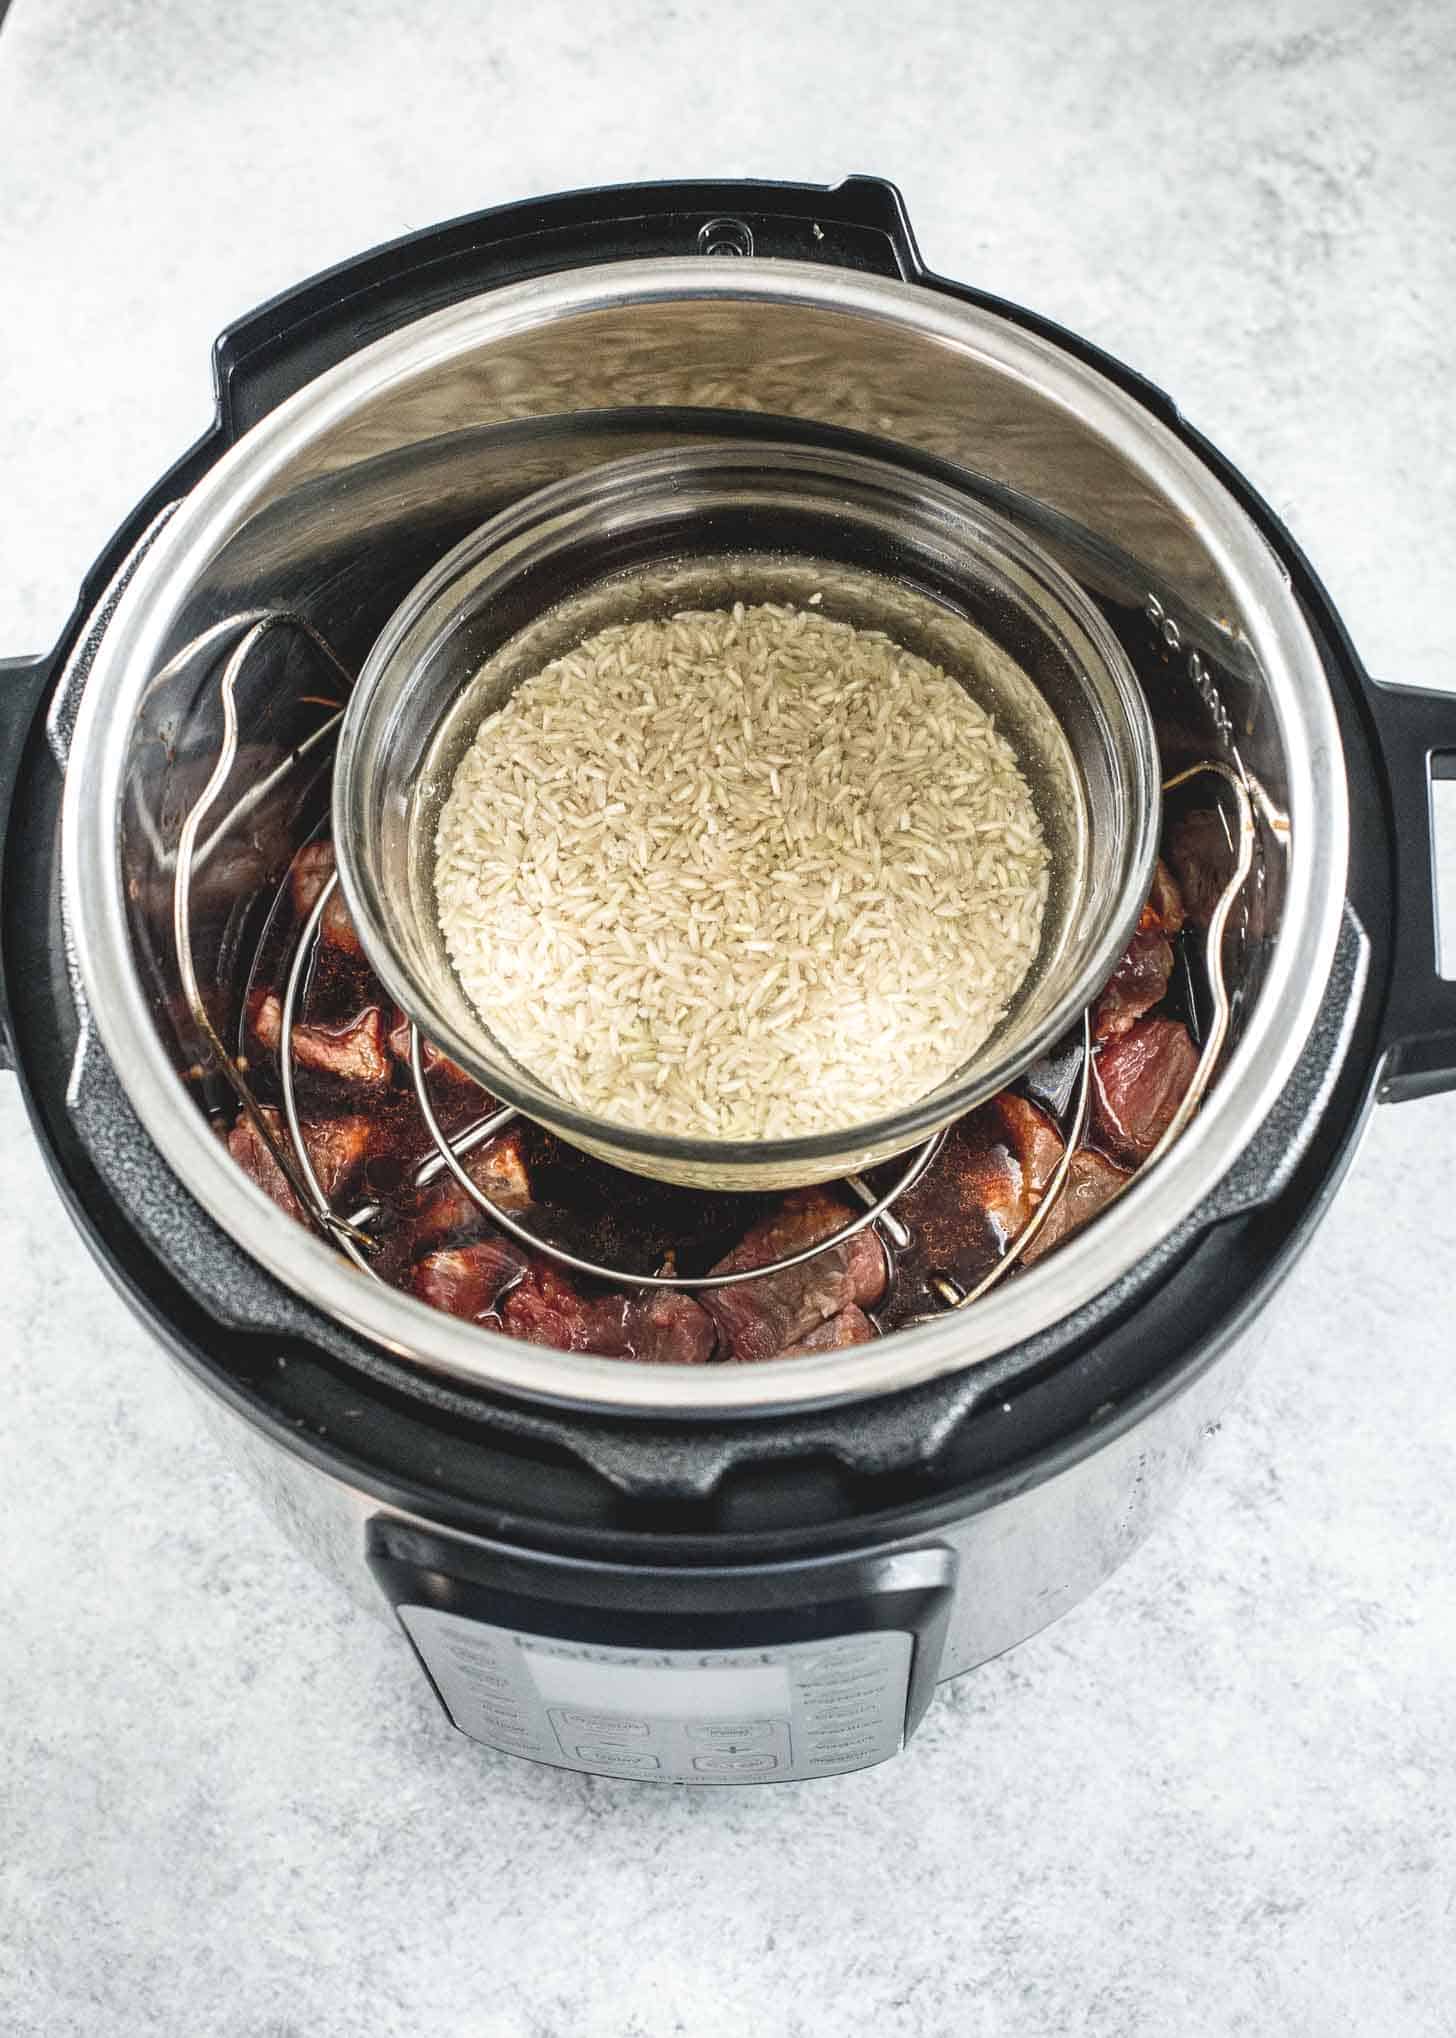 cooking beef and rice in the instant pot